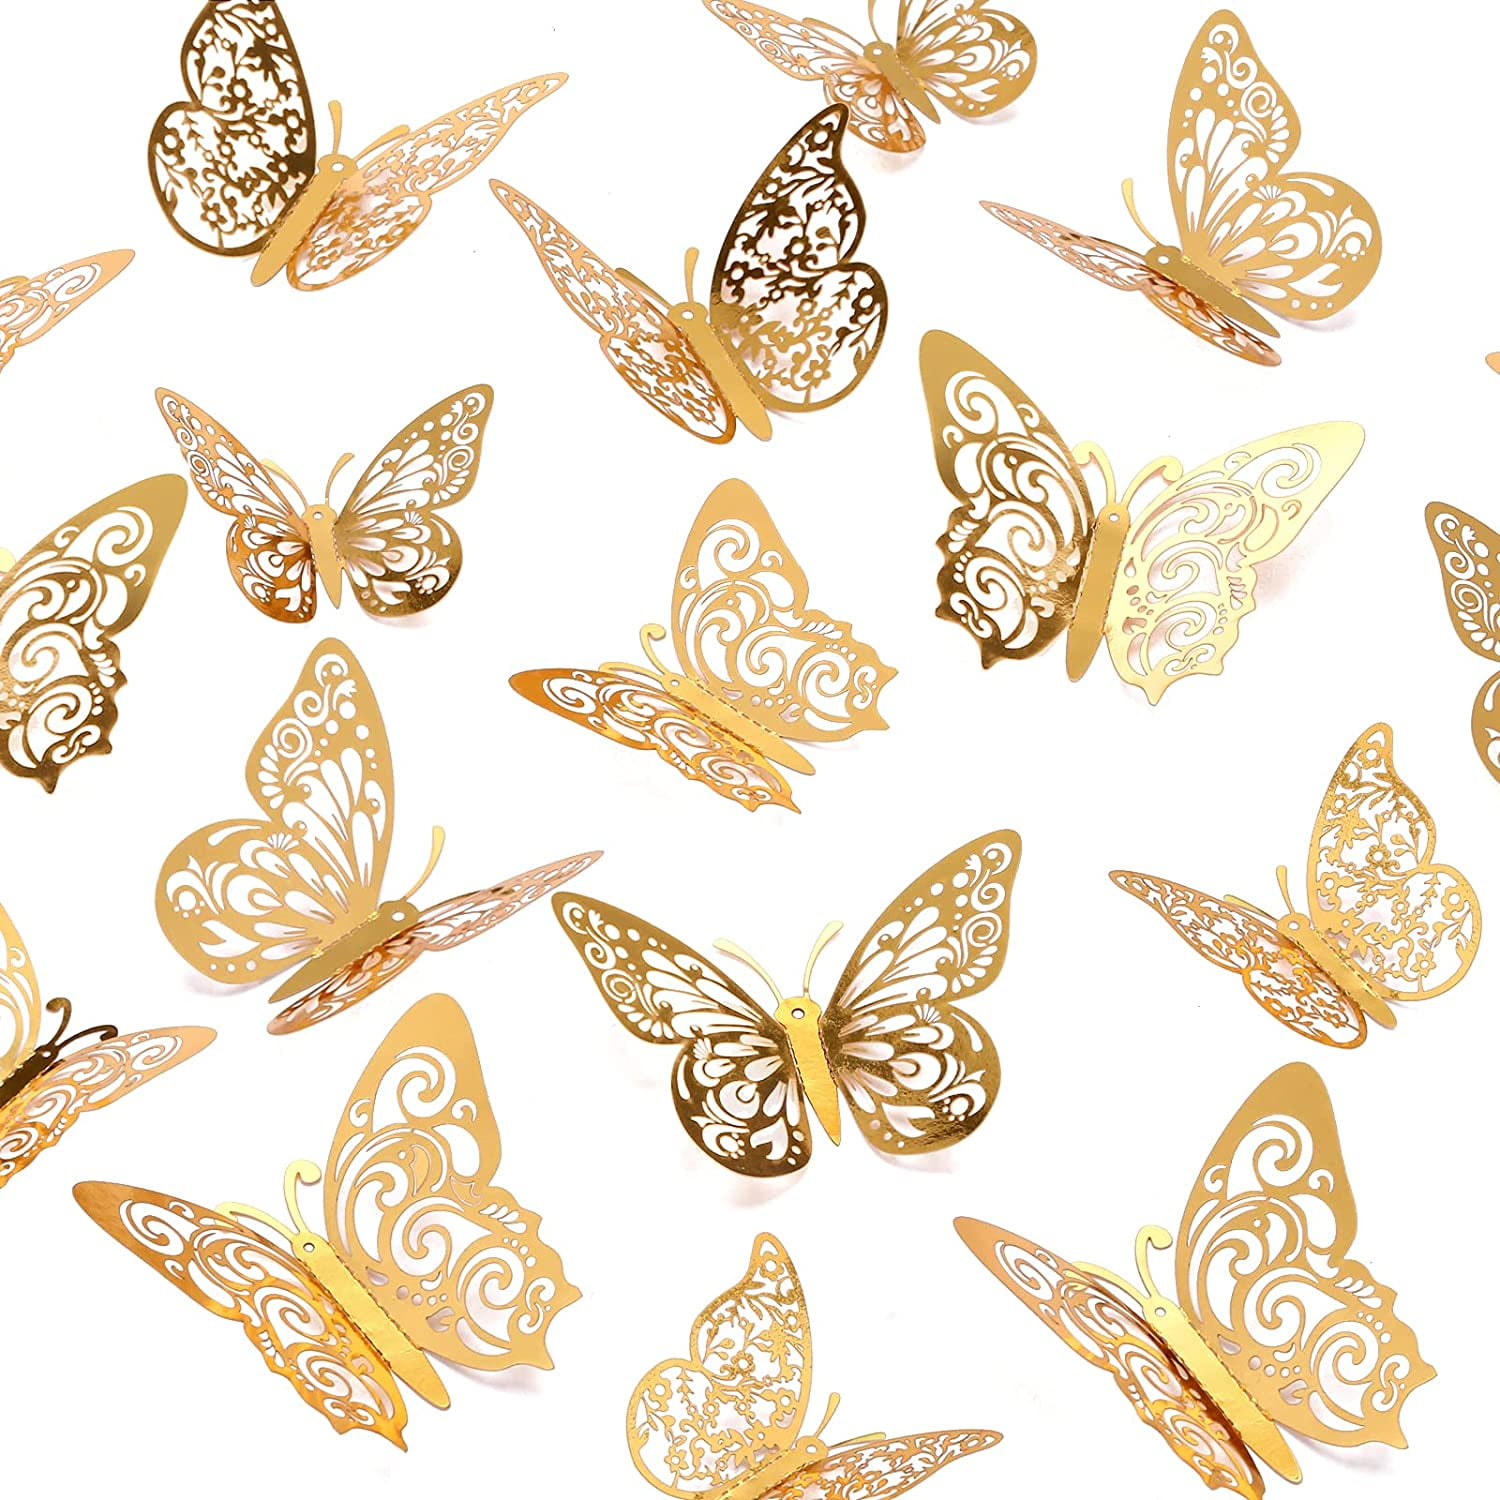 12pcs 3D Gold Butterfly Wall Decor Butterfly Decorations Butterfly Party Cake Decorations 3D Butterfly Stickers Decals for Girls Kids Baby Bedroom Bathroom Living Room Birthday 